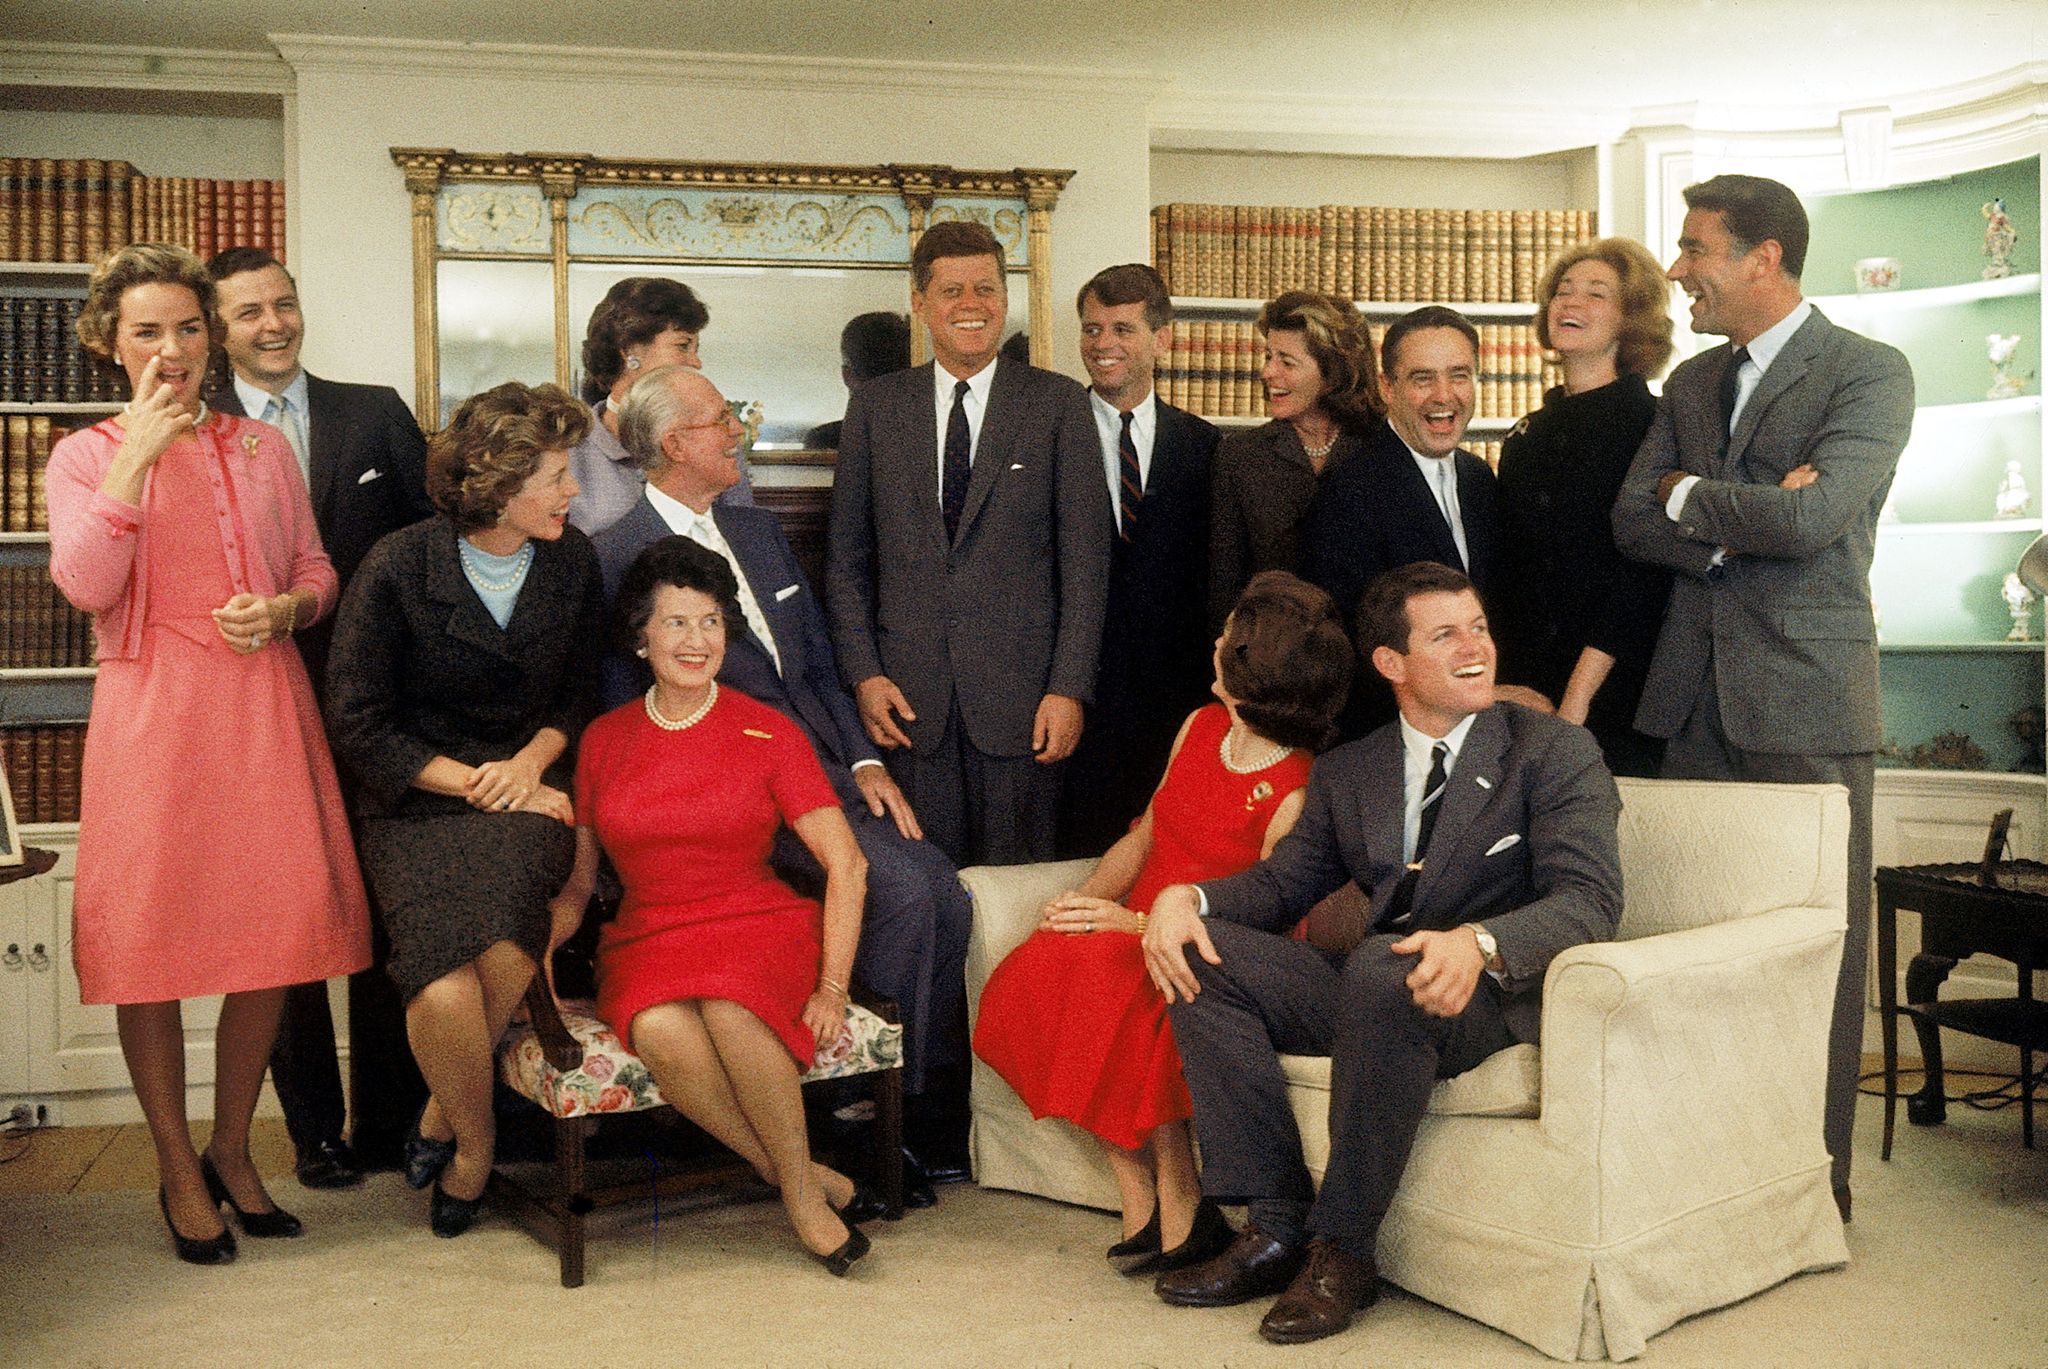 portrait of members of the kennedy family at their home on the night after john f kennedy won the 1960 us presidential election, hyannis port, massachusetts, november 9, 1960 sitting, from left, eunice shriver on chair arm, rose kennedy 1890   1995, joseph kennedy 1888   1969 on chair arm, jacqueline kennedy 1929   1994 head turned away from camera, and ted kennedy back row, from left, ethel kennedy, stephen smith 1927   1990, jean smith, american president john f kennedy 1917   1963, robert f kennedy 1925   1968, pat lawford 1924   2006, sargent shriver, joan kennedy, and peter lawford 1923   1984 photo by paul schutzerthe life picture collection via getty images